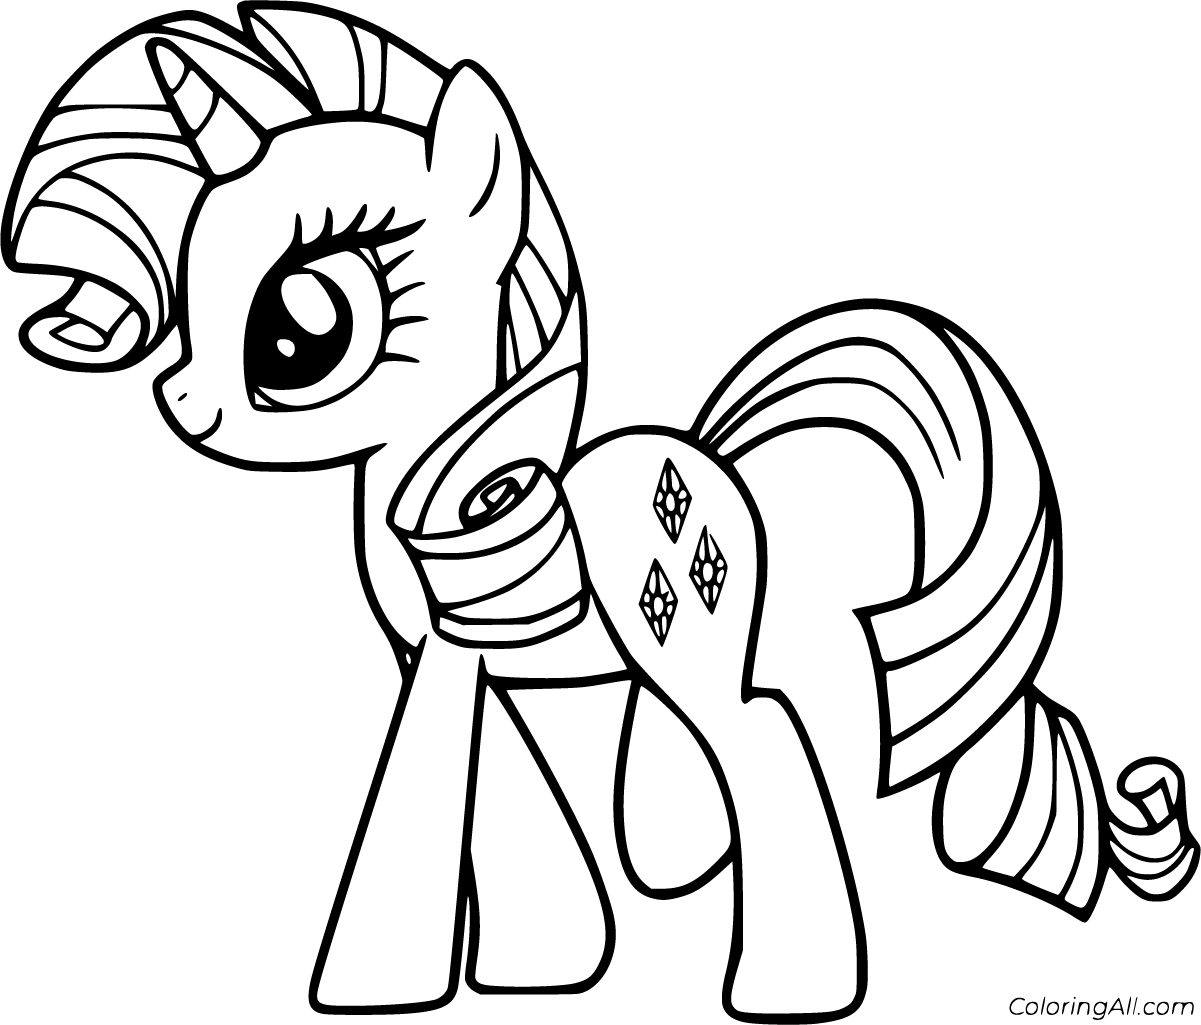 Rarity Coloring Pages   ColoringAll